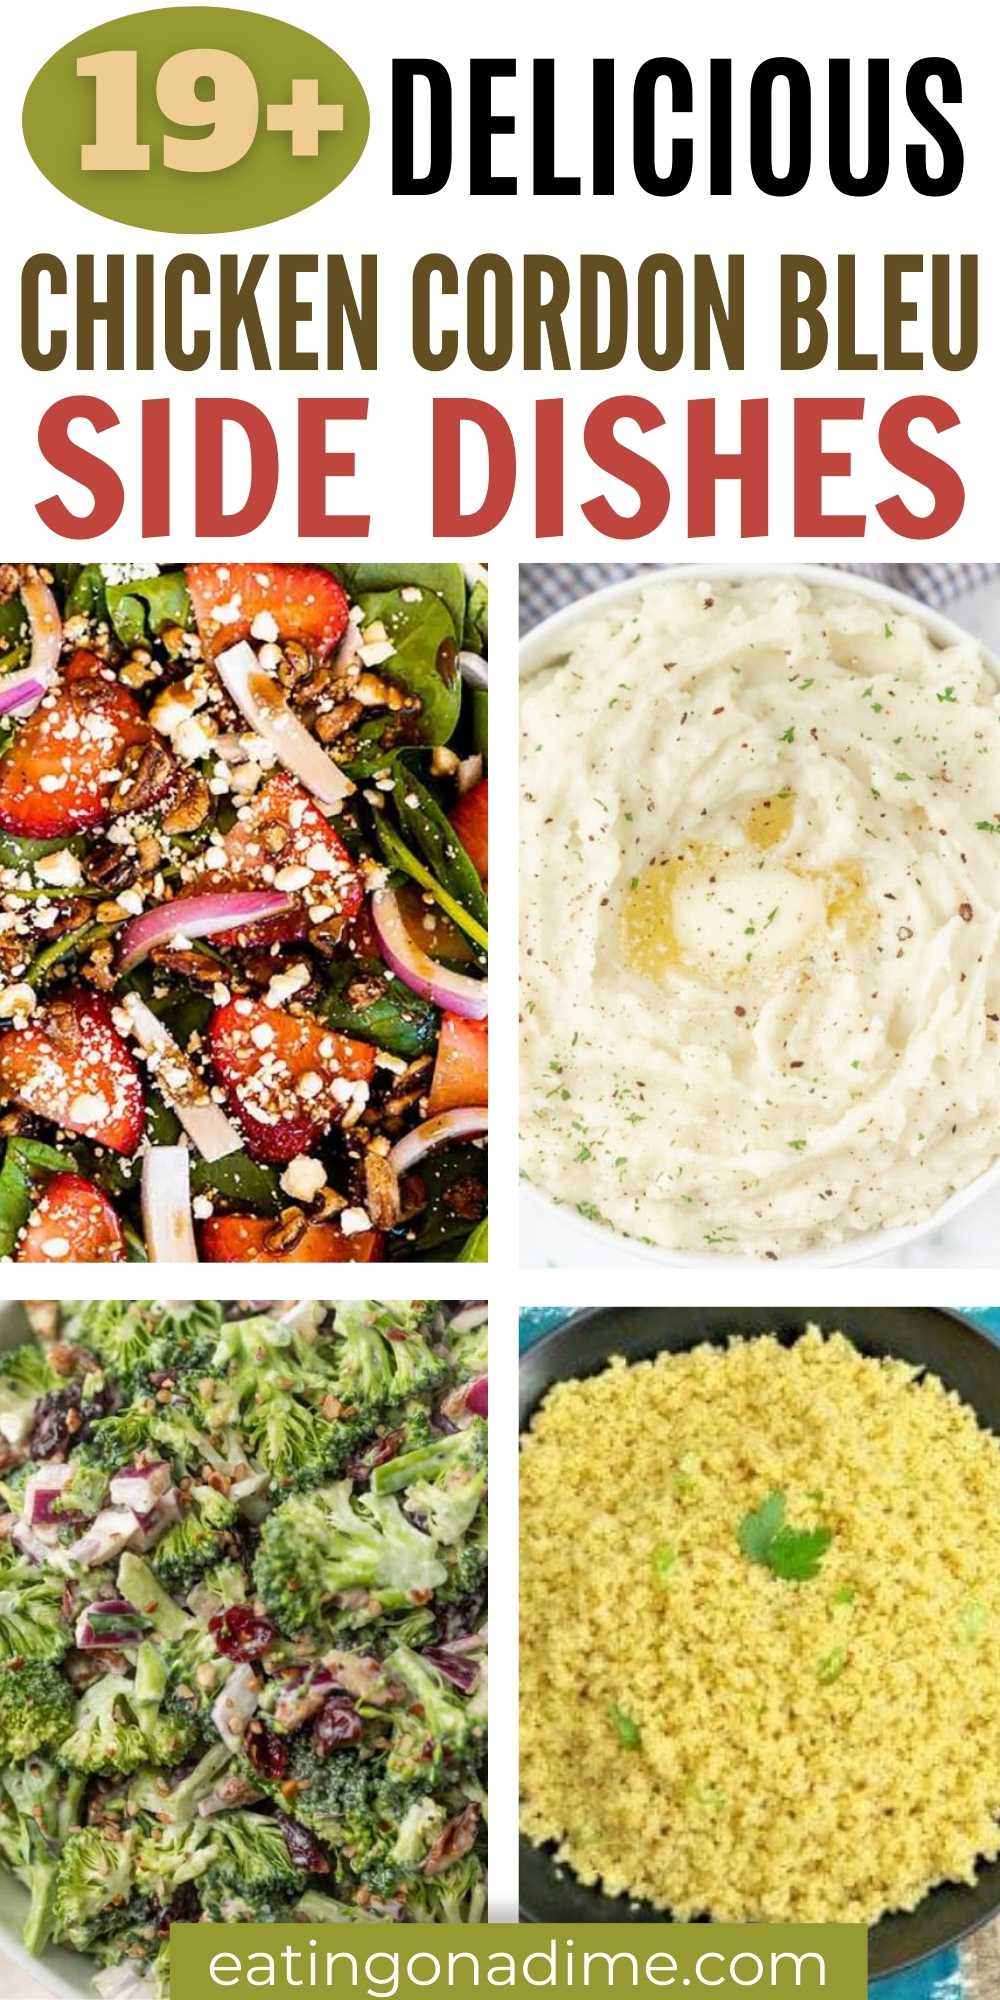 Choose from 19 delicious chicken cordon bleu sides for a fabulous dinner. Learn what to serve with chicken cordon bleu for a complete meal. Check out my go to side dishes for Chicken Cordon Bleu.  #eatingonadime #sidedishes #sidedishrecipes #chickencordonbleu 
